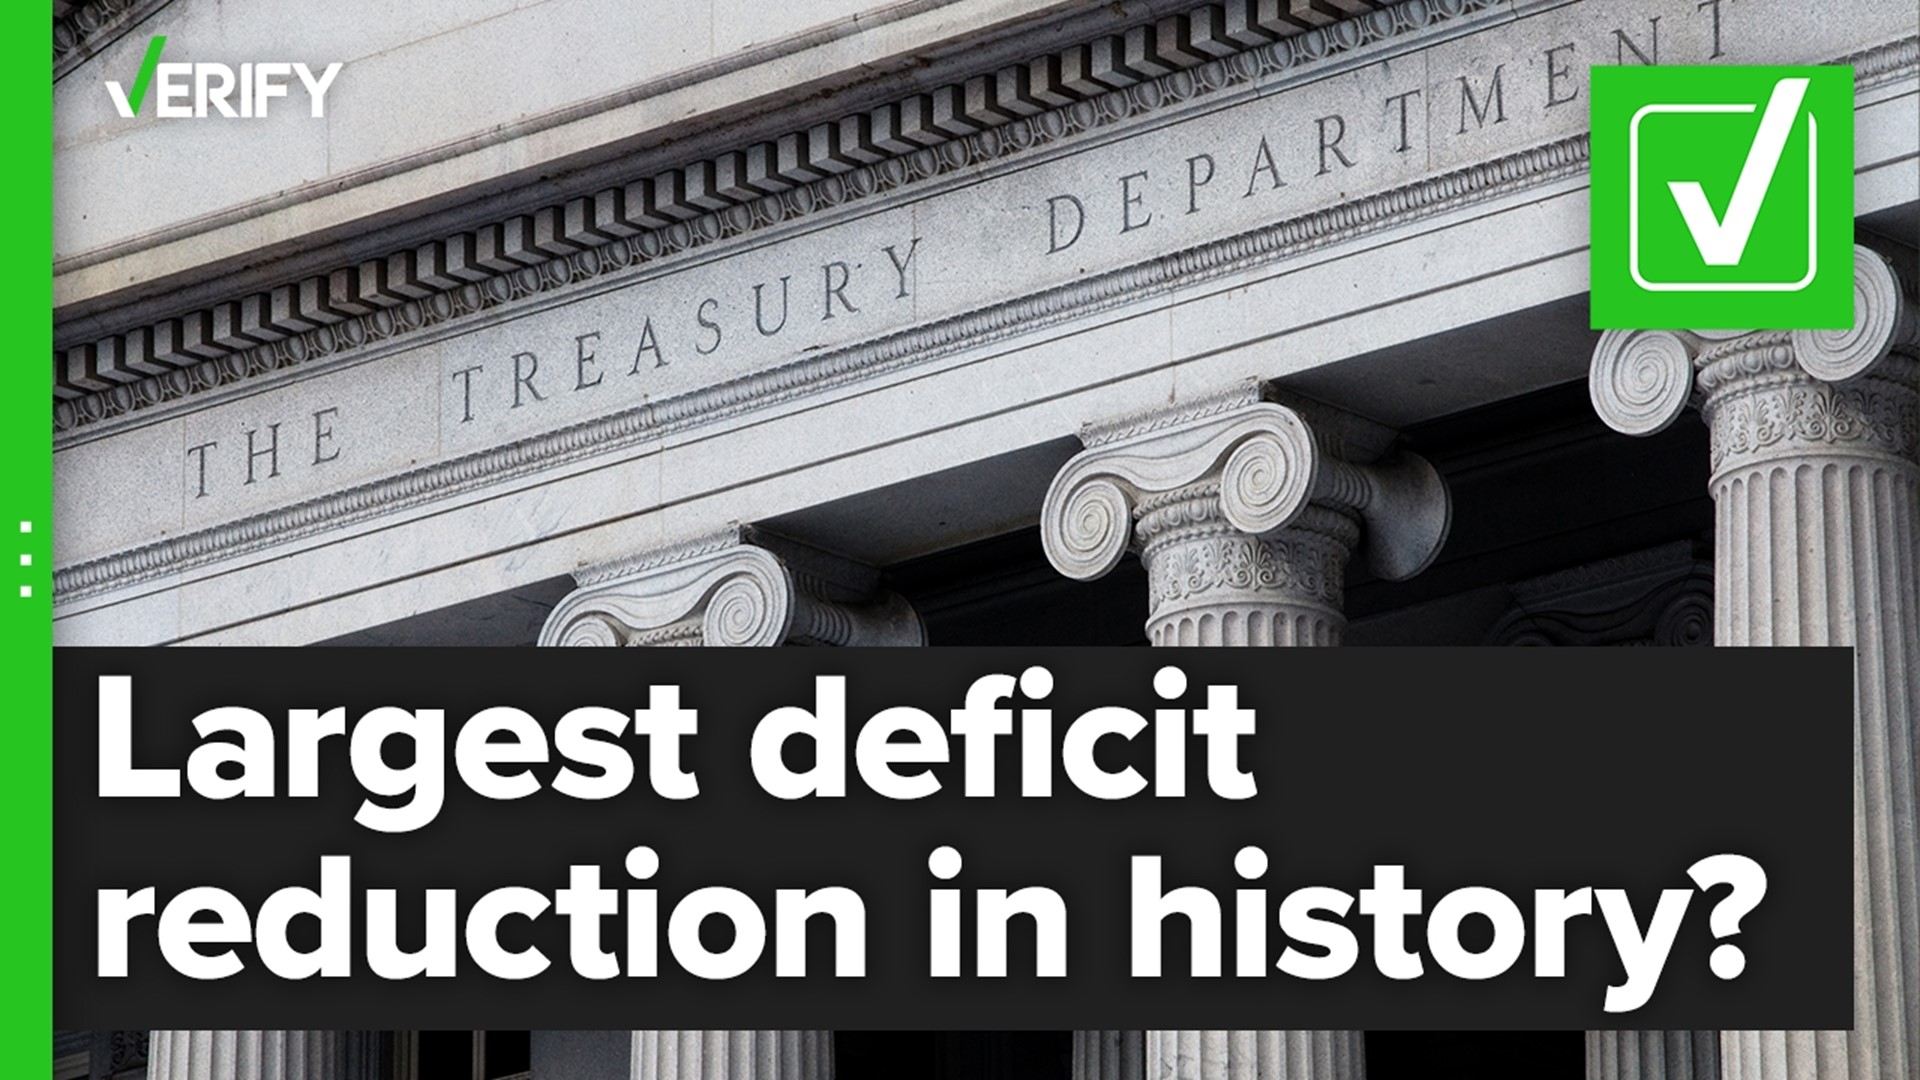 President Biden projected the federal budget deficit will decrease by more than a trillion dollars in 2022. If it does, that would set a record.